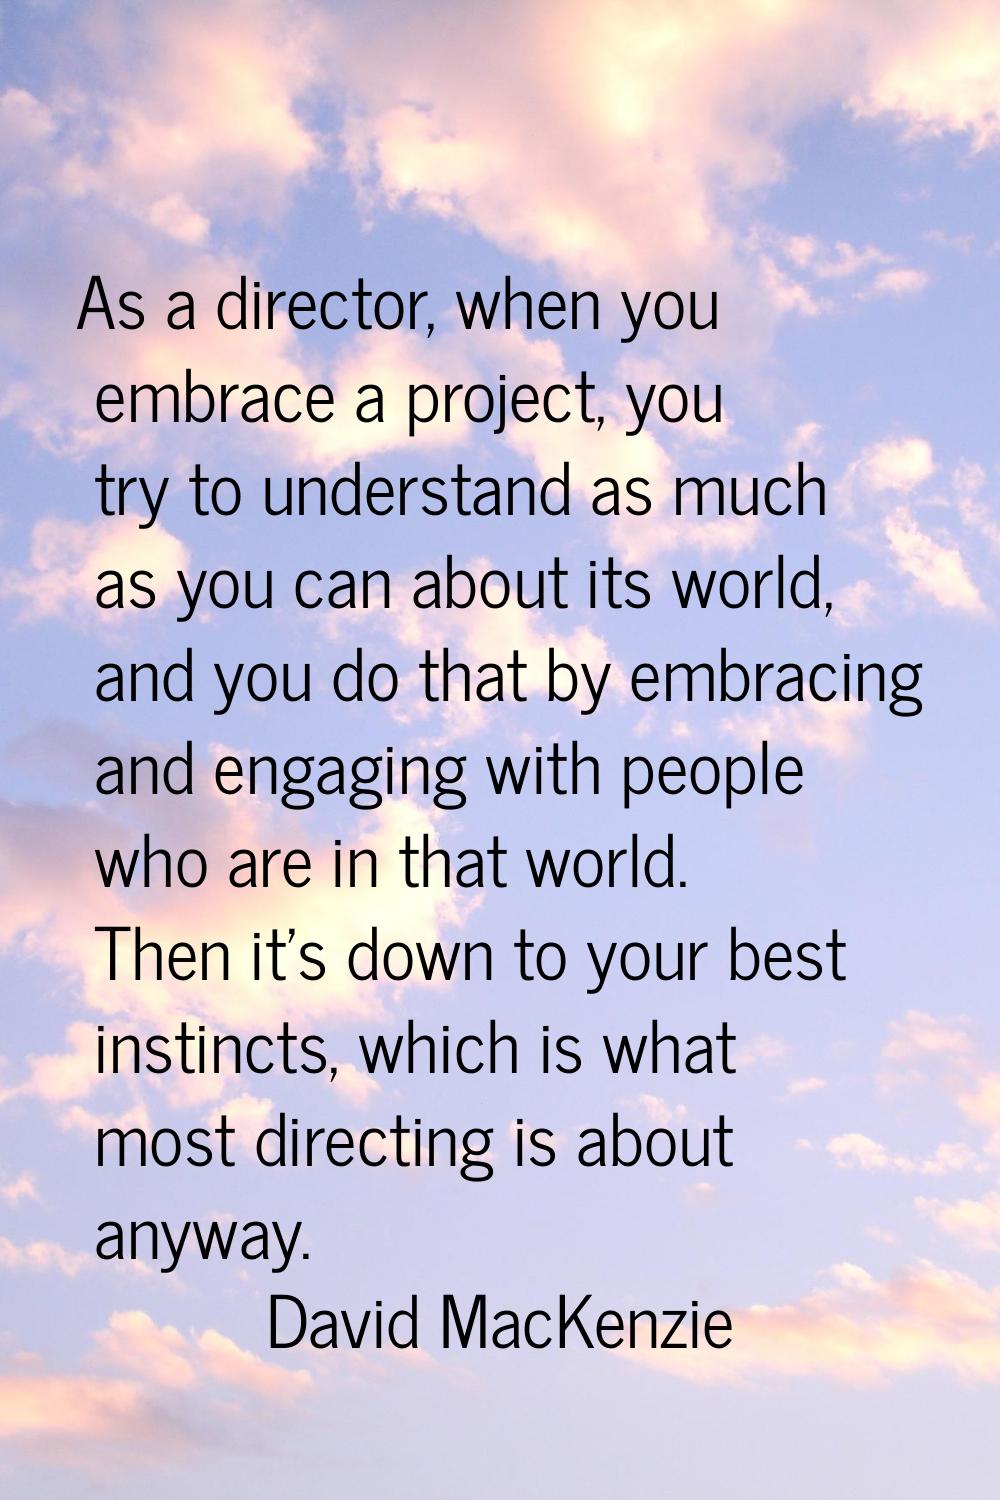 As a director, when you embrace a project, you try to understand as much as you can about its world